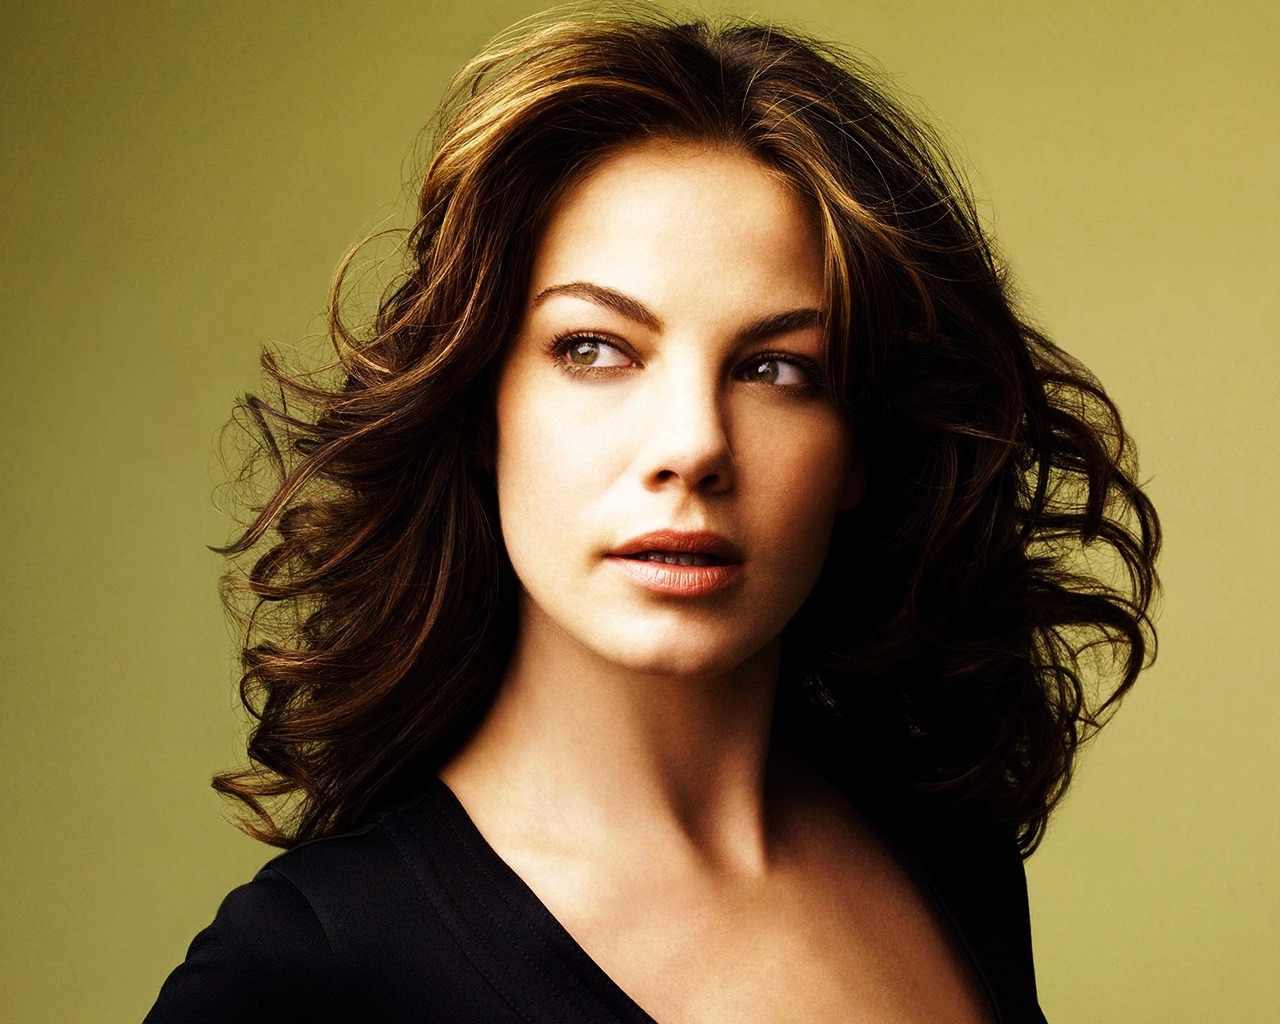 Michelle Monaghan for 1280 x 1024 resolution